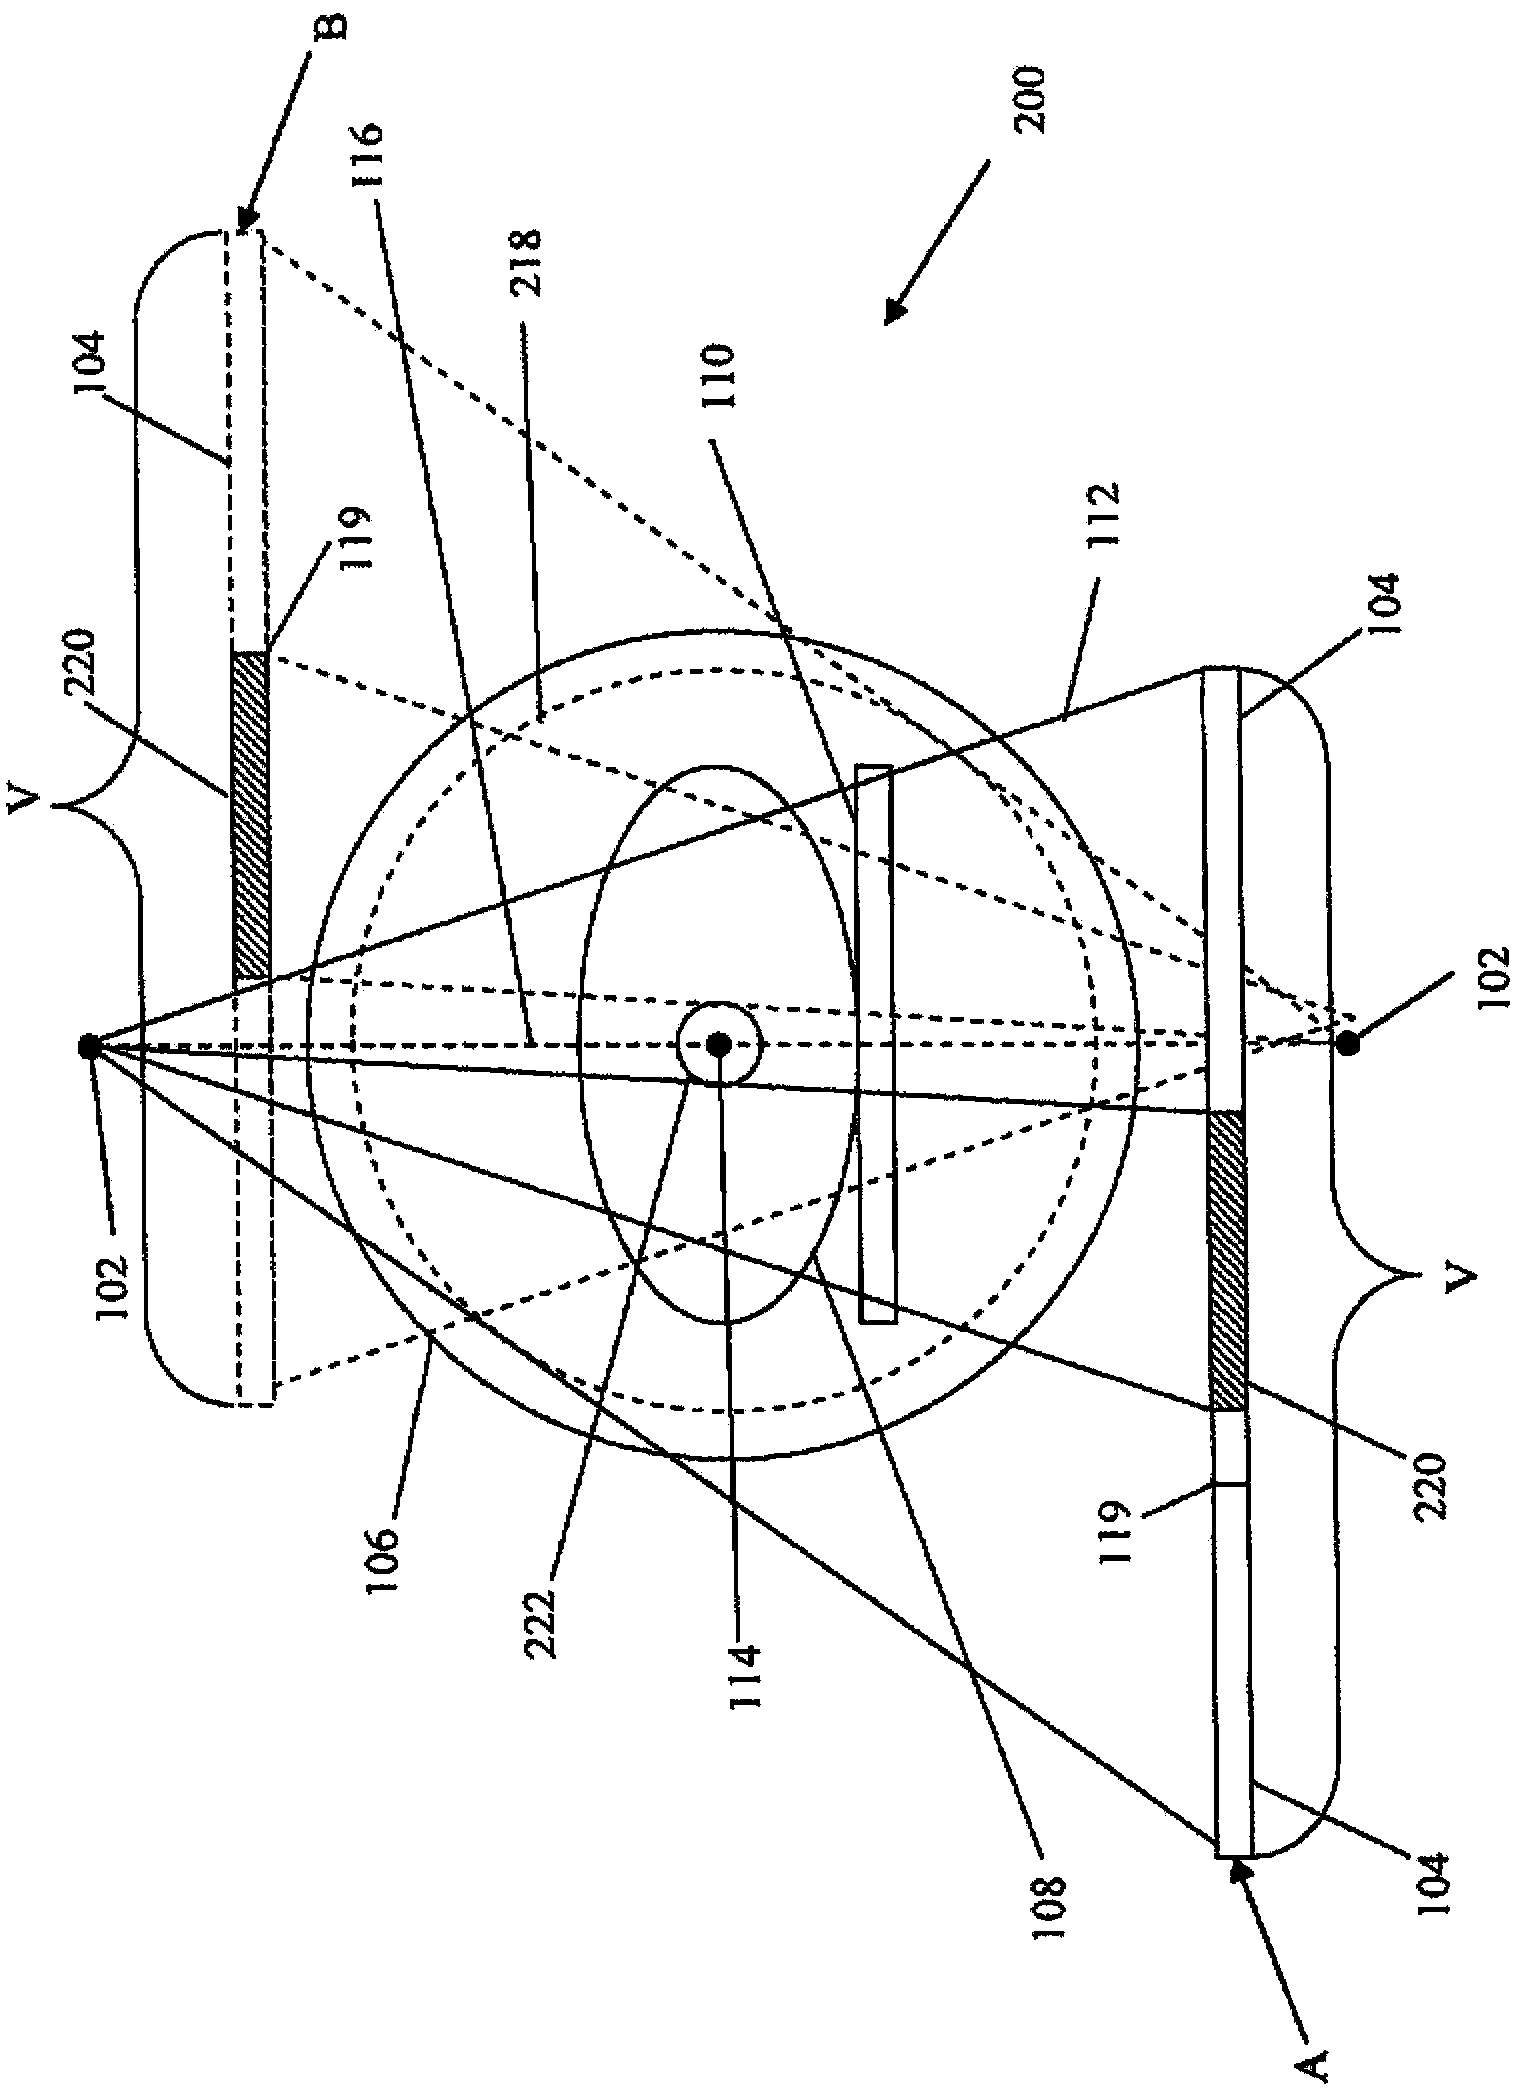 Method and apparatus for large field of view imaging and detection and compensation of motion artifacts